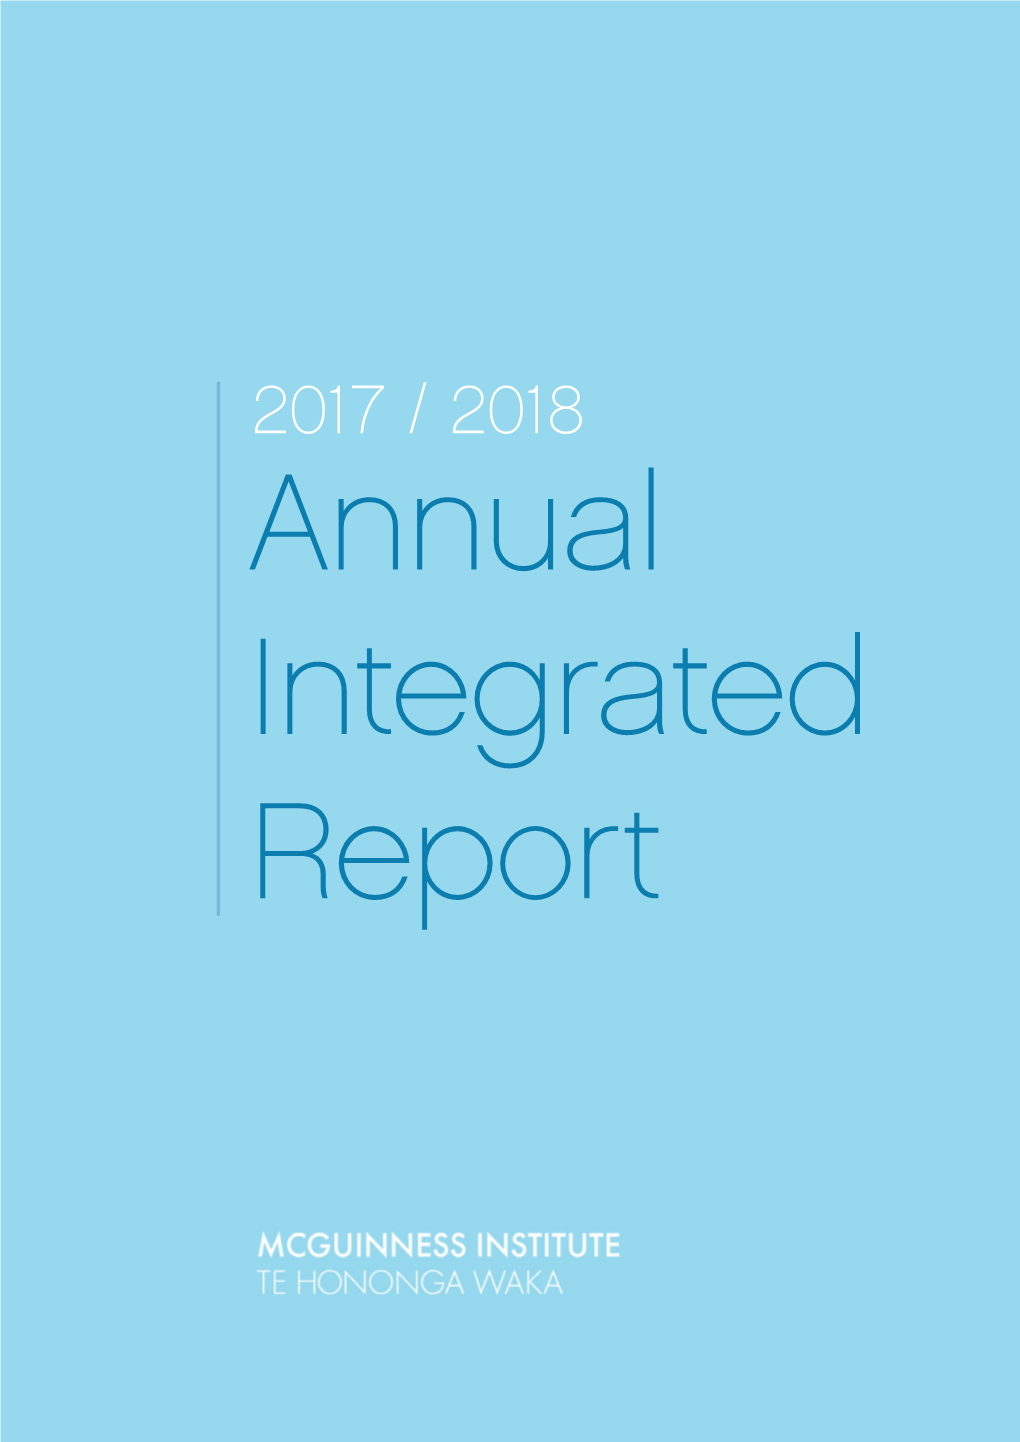 Annual Integrated Report 2017/2018 | 1 Central Government to Trust Local Government Is One of the Key Issues Underpinning Poverty in New Zealand